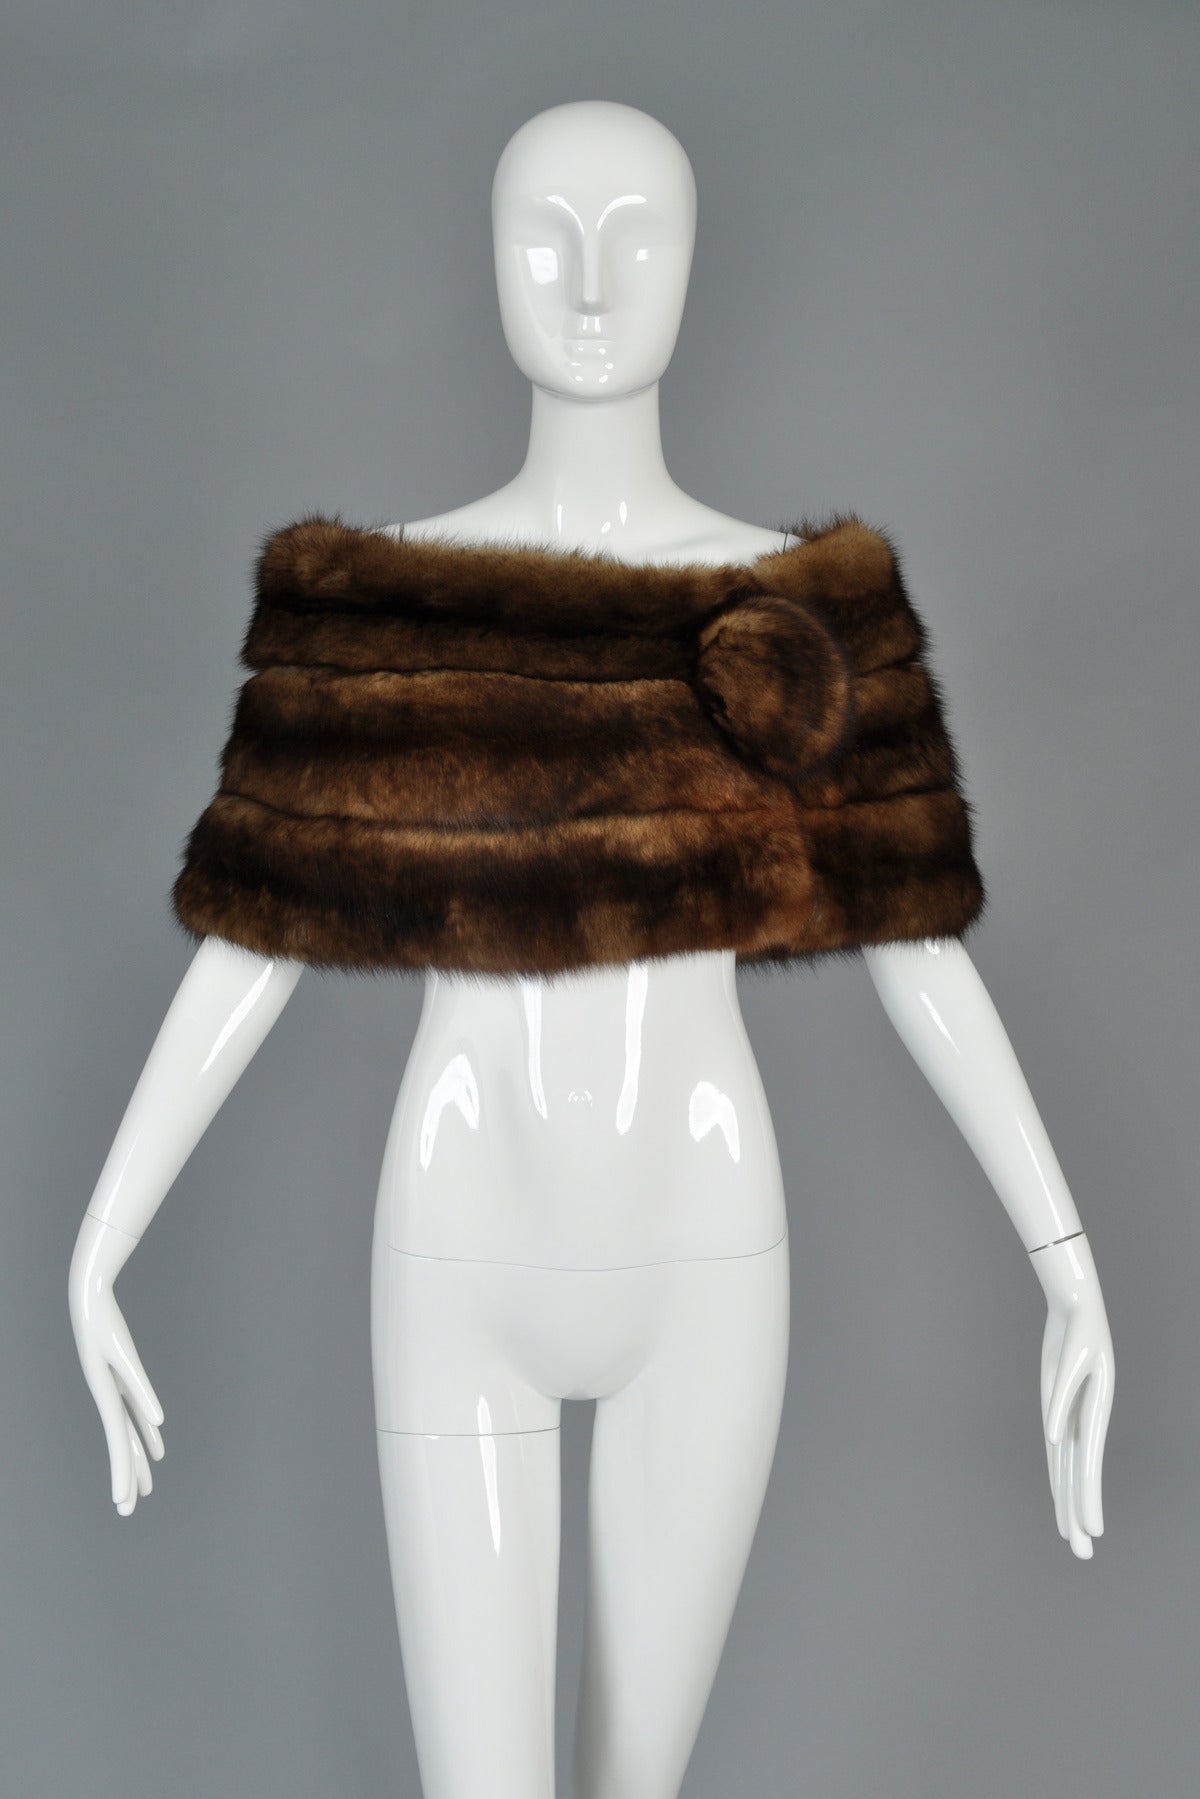 Absolutely stunning vintage 1960s genuine Russian Sable fur stole. Glamorous and hard to find off-the-shoulder construction. Three rows of ultra wide male sable pelts with giant pouf button. Can be worn open in classic style or off the shoulder and